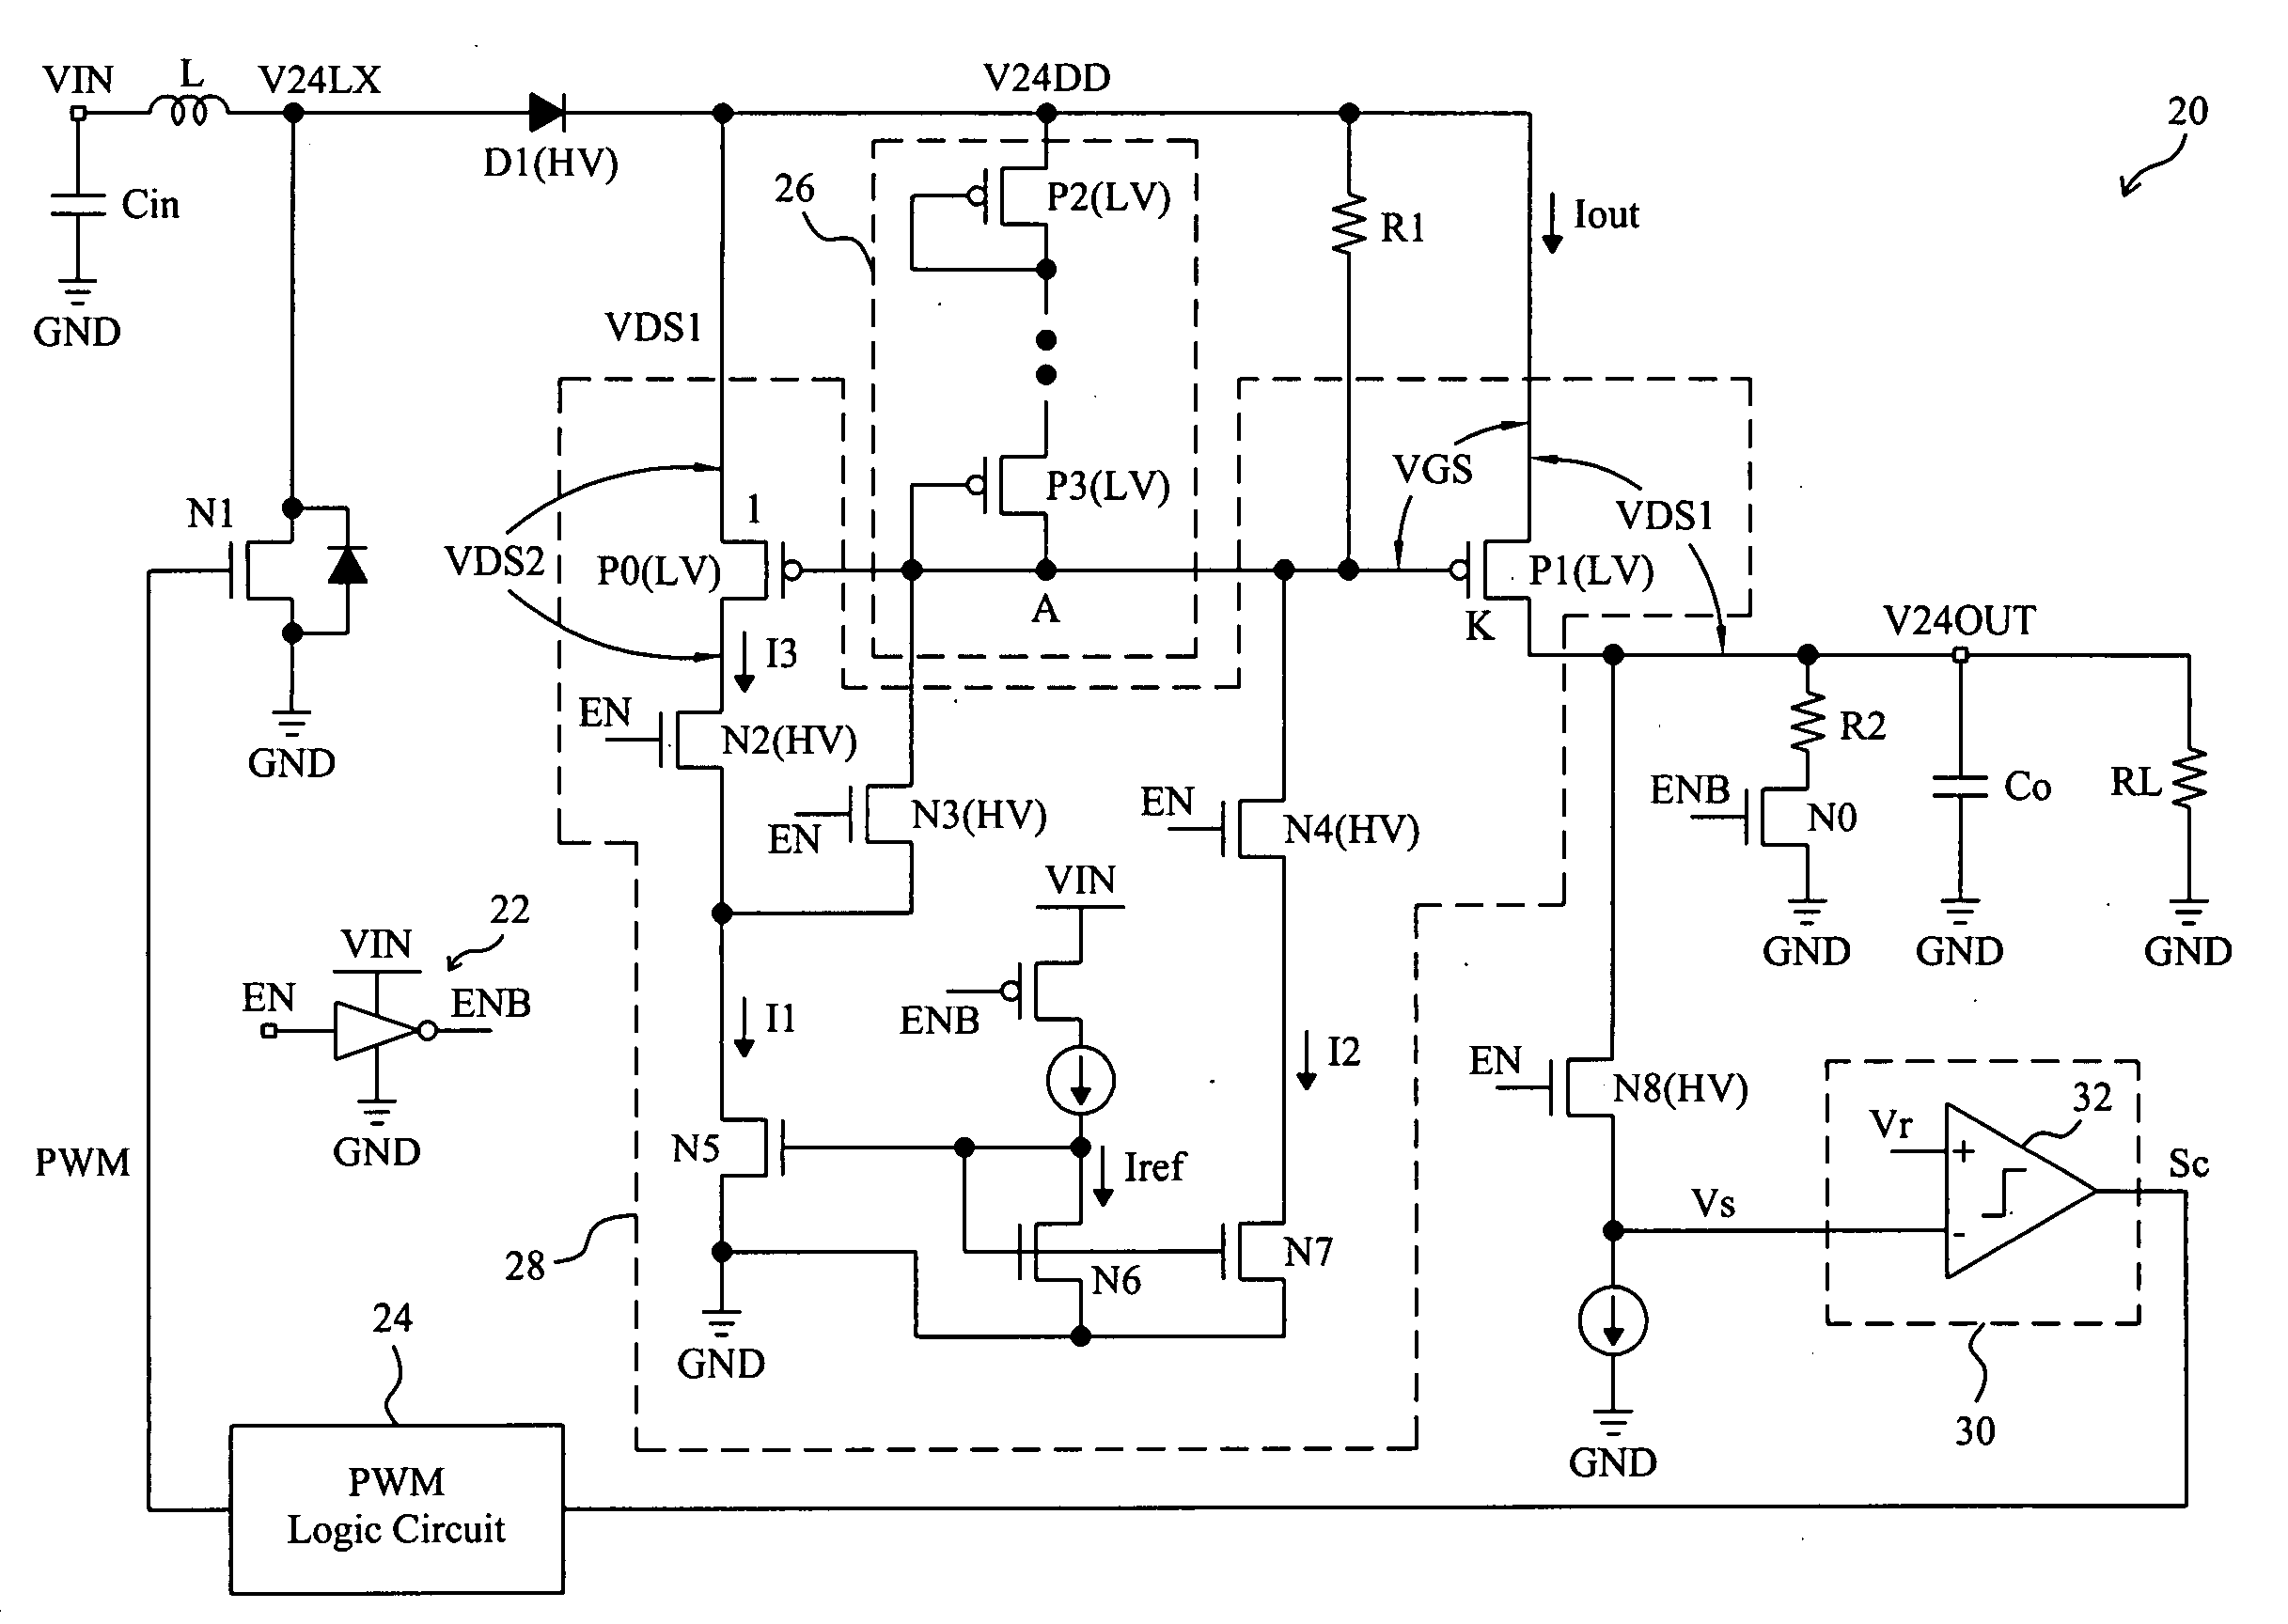 Non-synchronous boost converter including low-voltage device for load disconnection